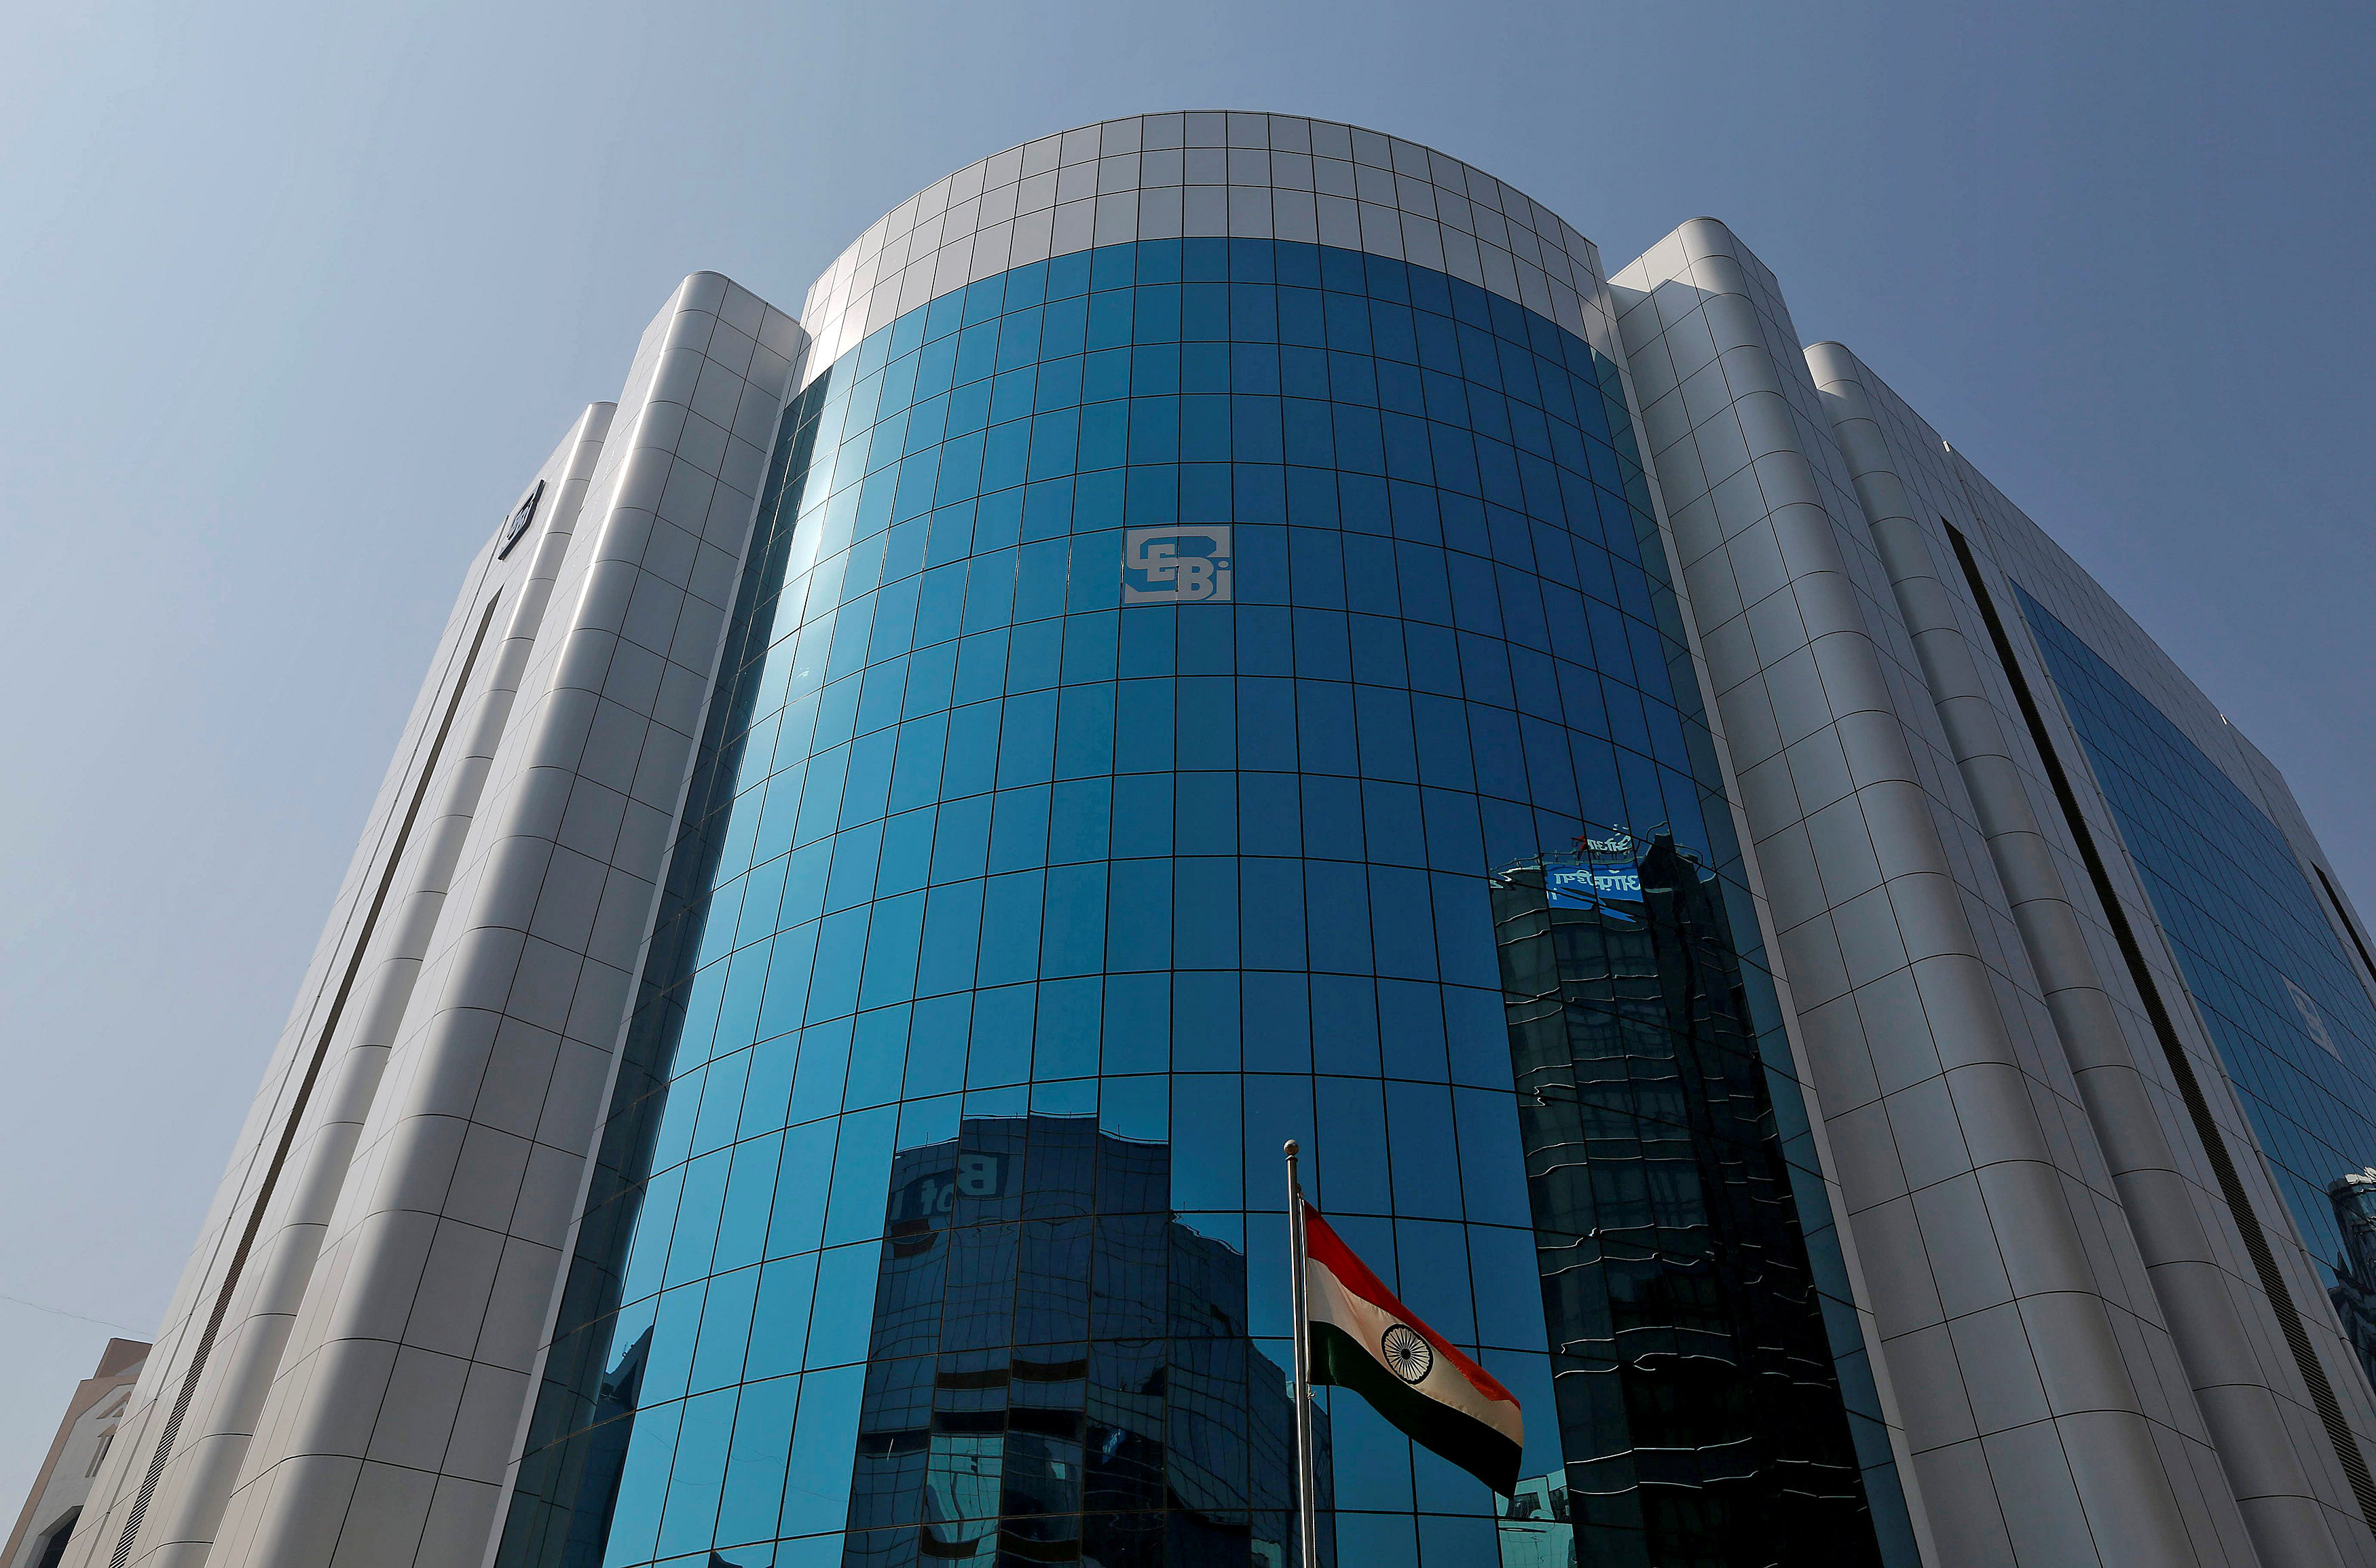 Sebi said AIF norms require manager of an angel fund to obtain undertaking of angel investors confirming their approval before investing the funds of investors in any venture capital undertaking. (Reuters Photo)